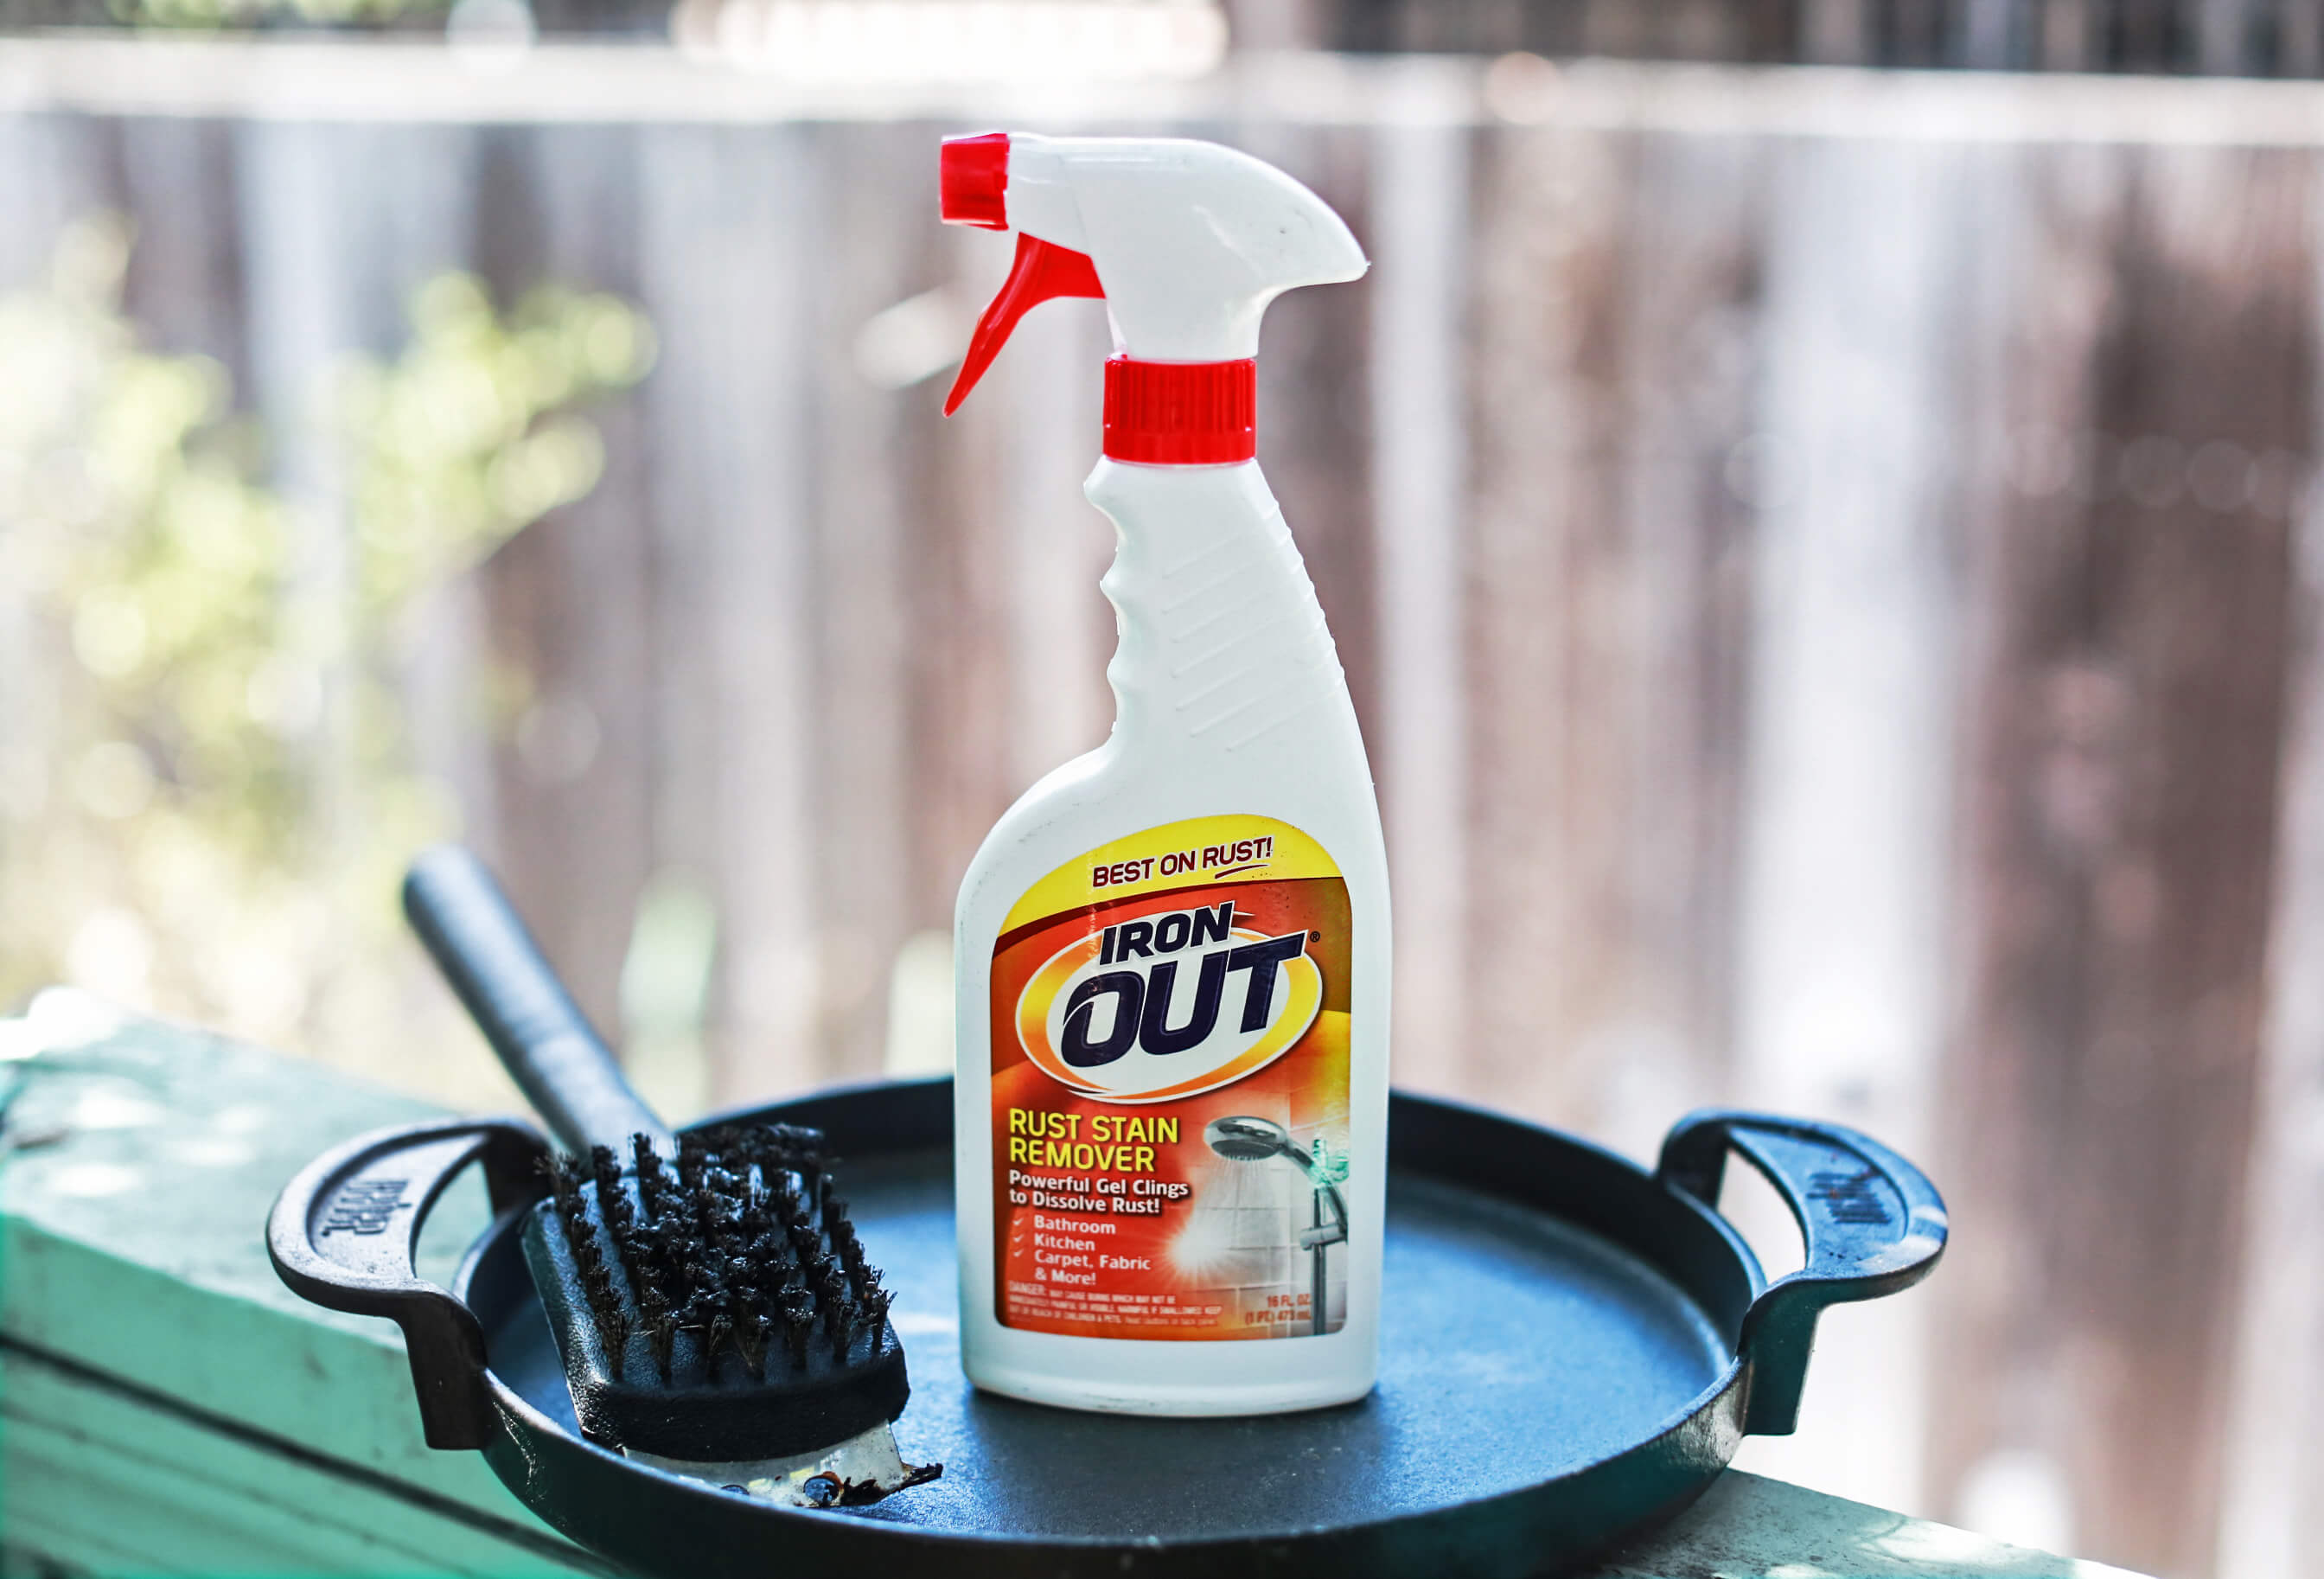 Iron out next to barbecue brush